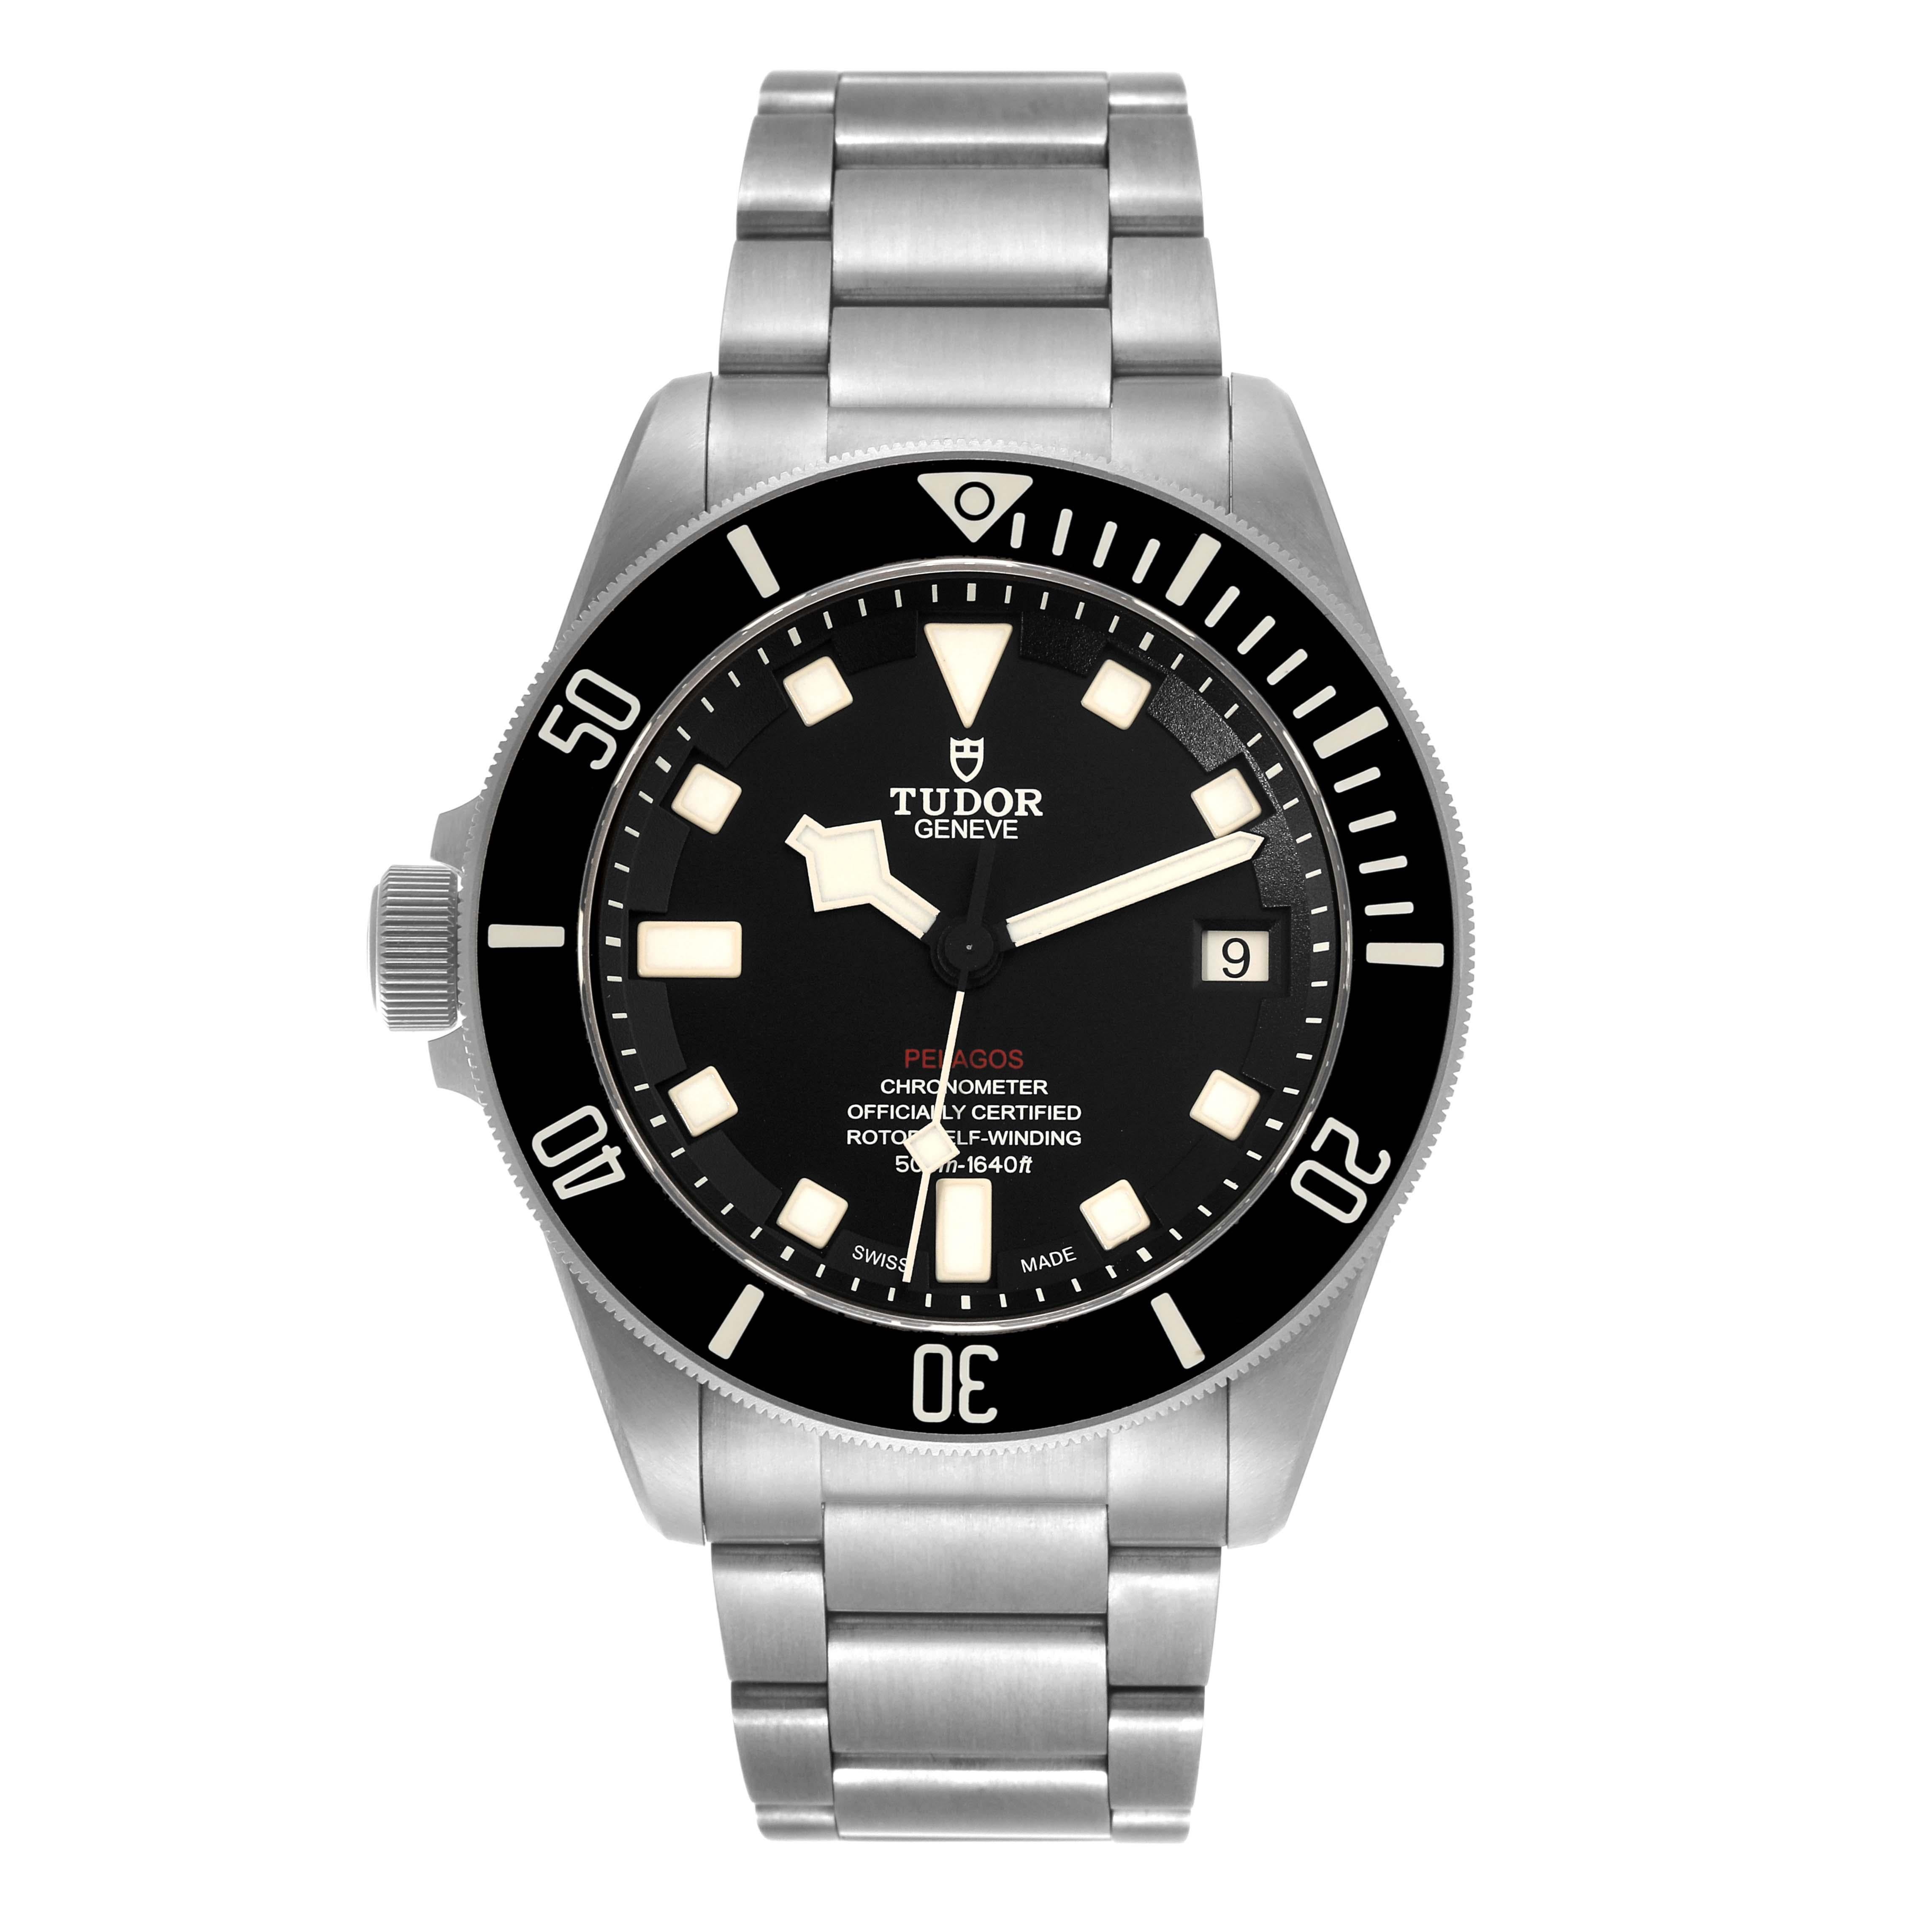 Tudor Pelagos 42mm LHD Titanium Steel Mens Watch 25610 Box Card. Automatic self-winding movement. Titanium and steel case 42 mm in diameter. Tudor logo on a crown. Pointed crown guards. Unidirectional rotating 60 minute graduated bezel with black